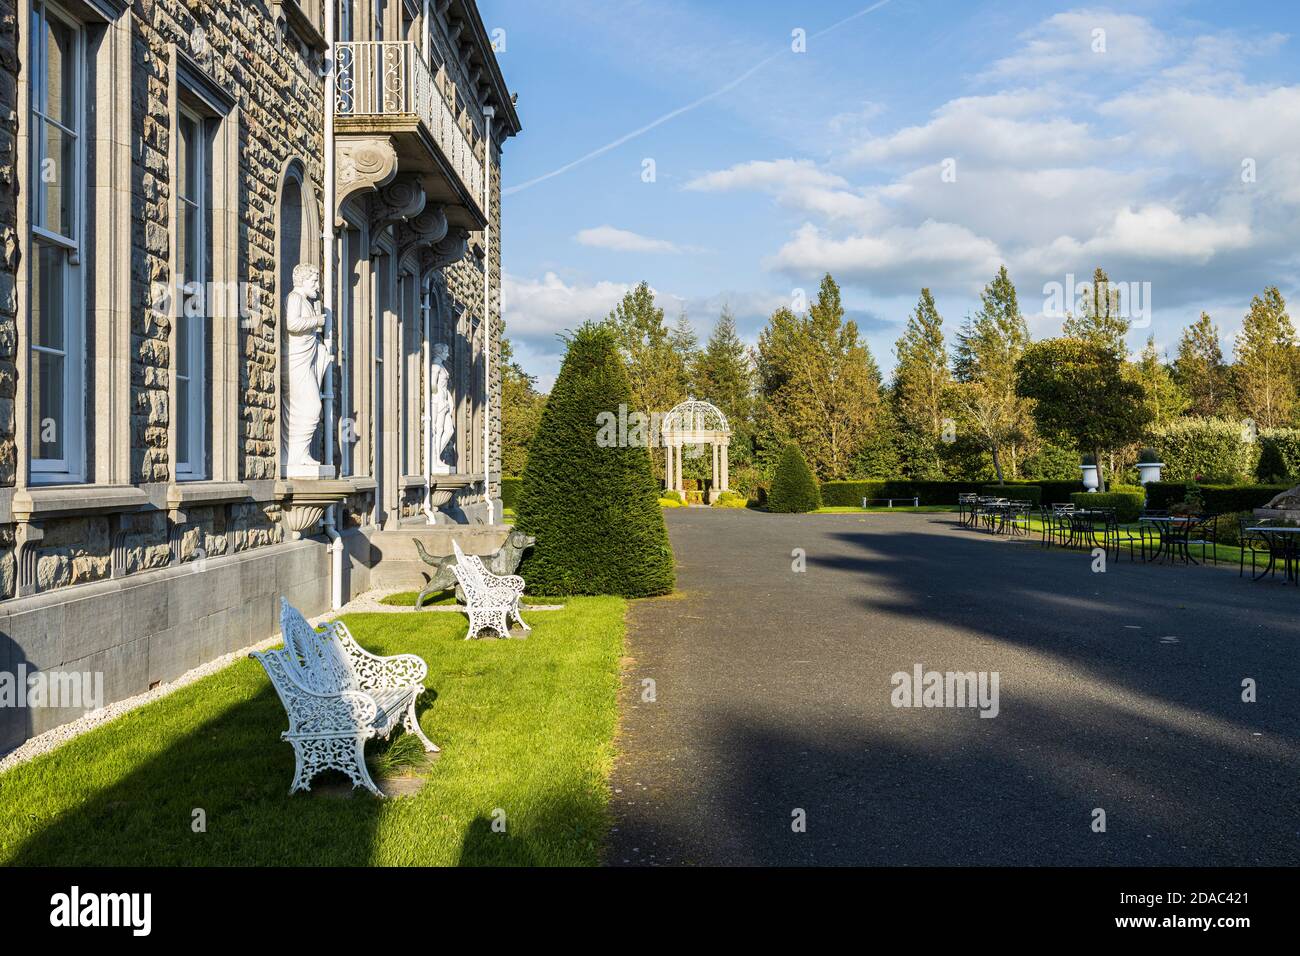 Palladian style architecture, manor house at the estate of Palmerstown House, Johnstown, County Kildare, Ireland Stock Photo